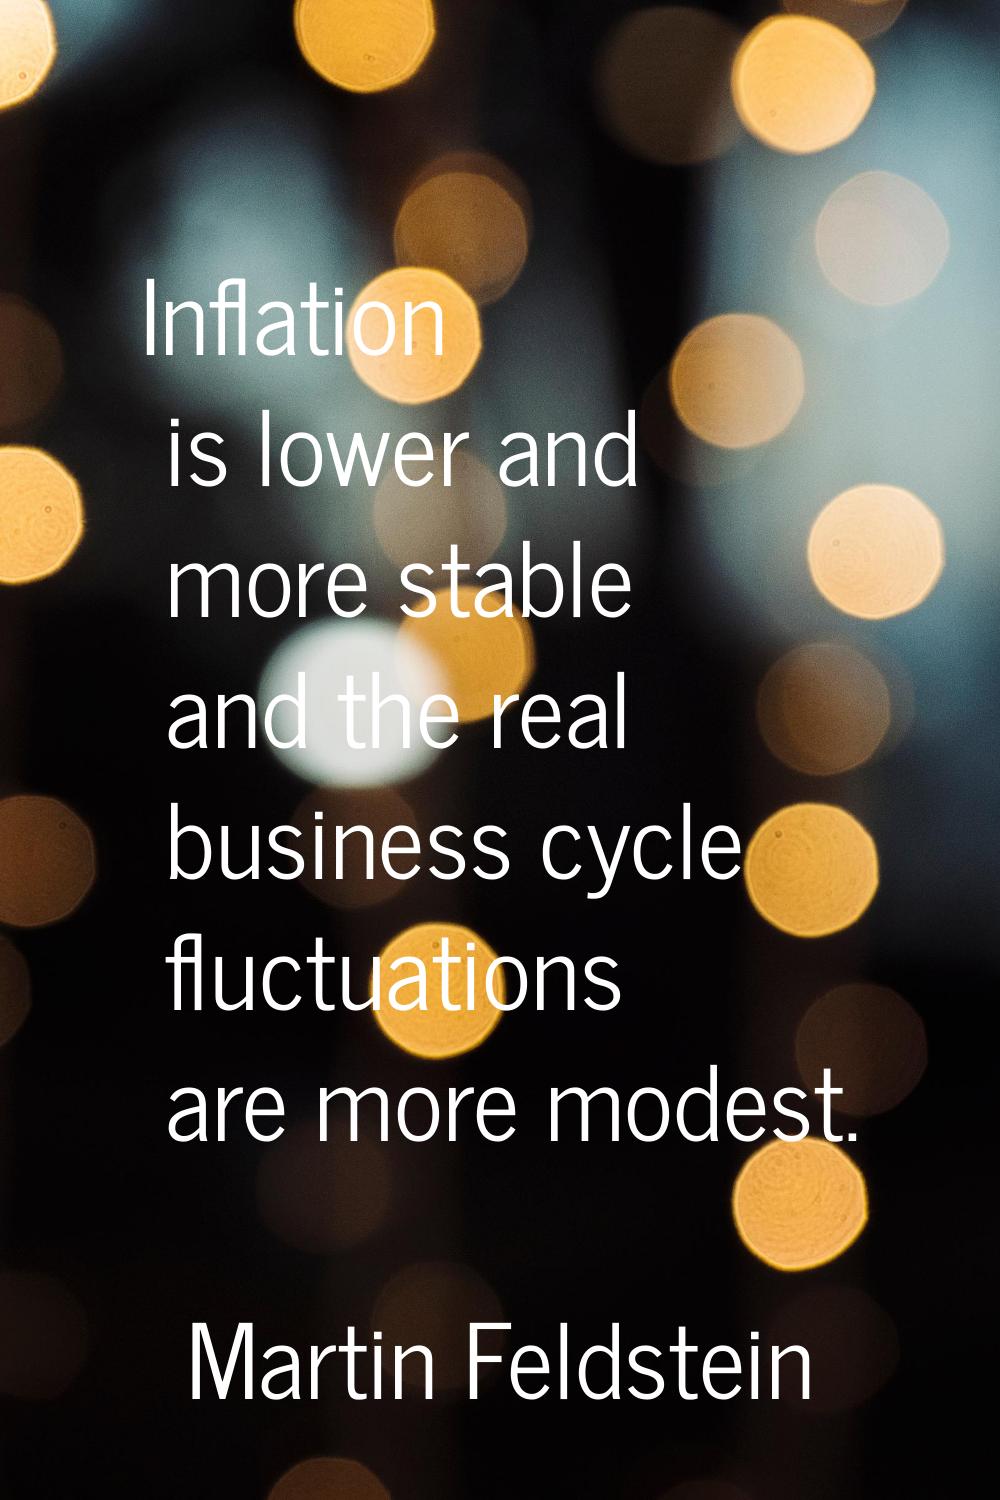 Inflation is lower and more stable and the real business cycle fluctuations are more modest.